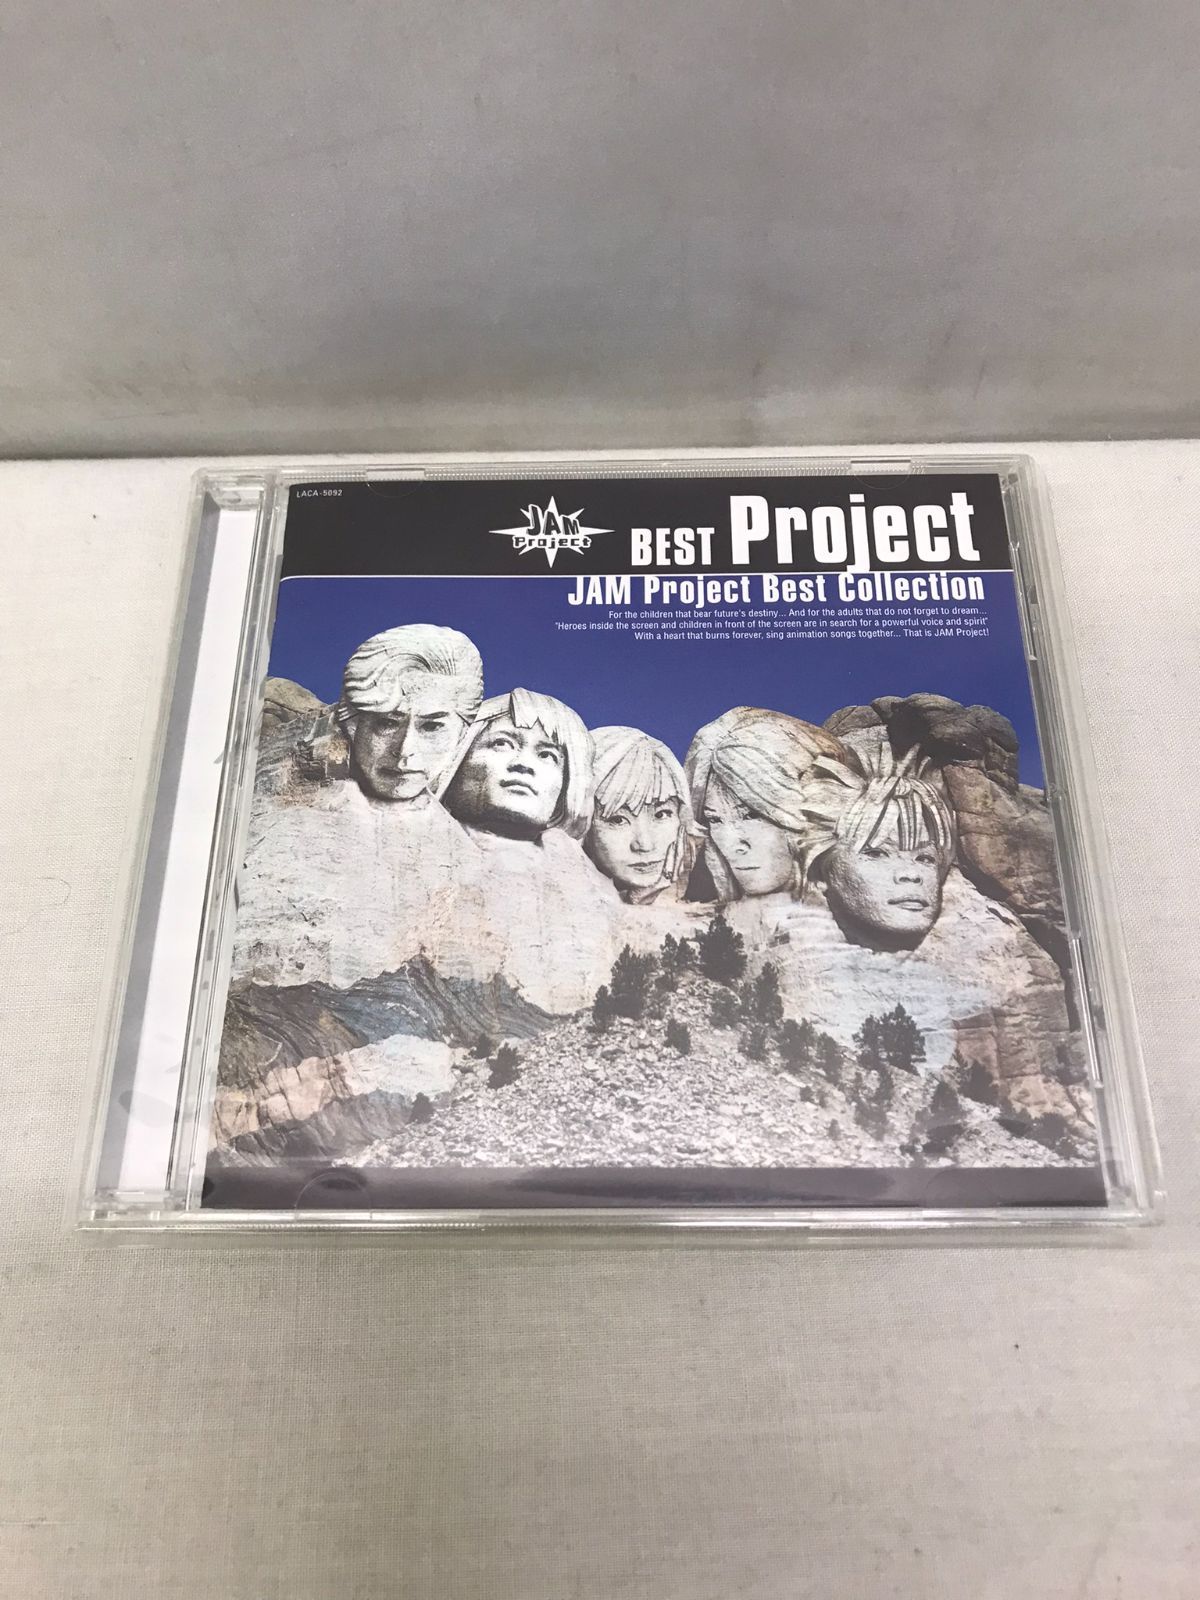 【CD】BEST Project ~JAM Project BEST COLLECTION~ JAM Project さかもとえいぞう 松本梨香  水木一郎 影山ヒロノブ 遠藤正明 工藤哲雄 河野陽吾 椎名可憐 須藤賢一